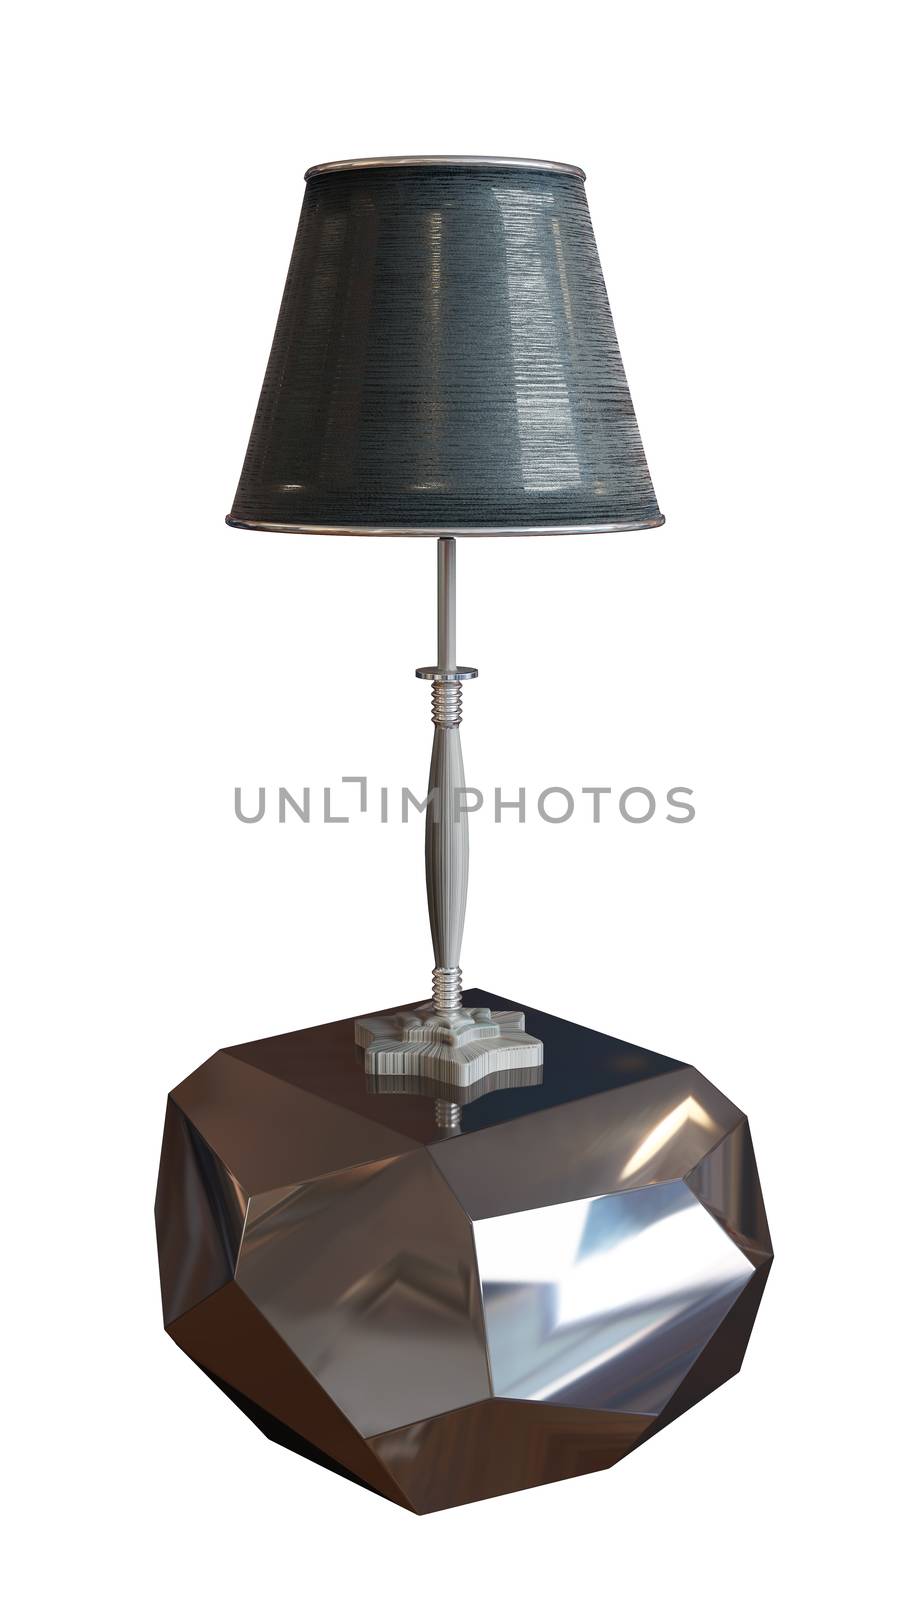 Lamp with lampshade sitting on a metallic pedestal by Morphart